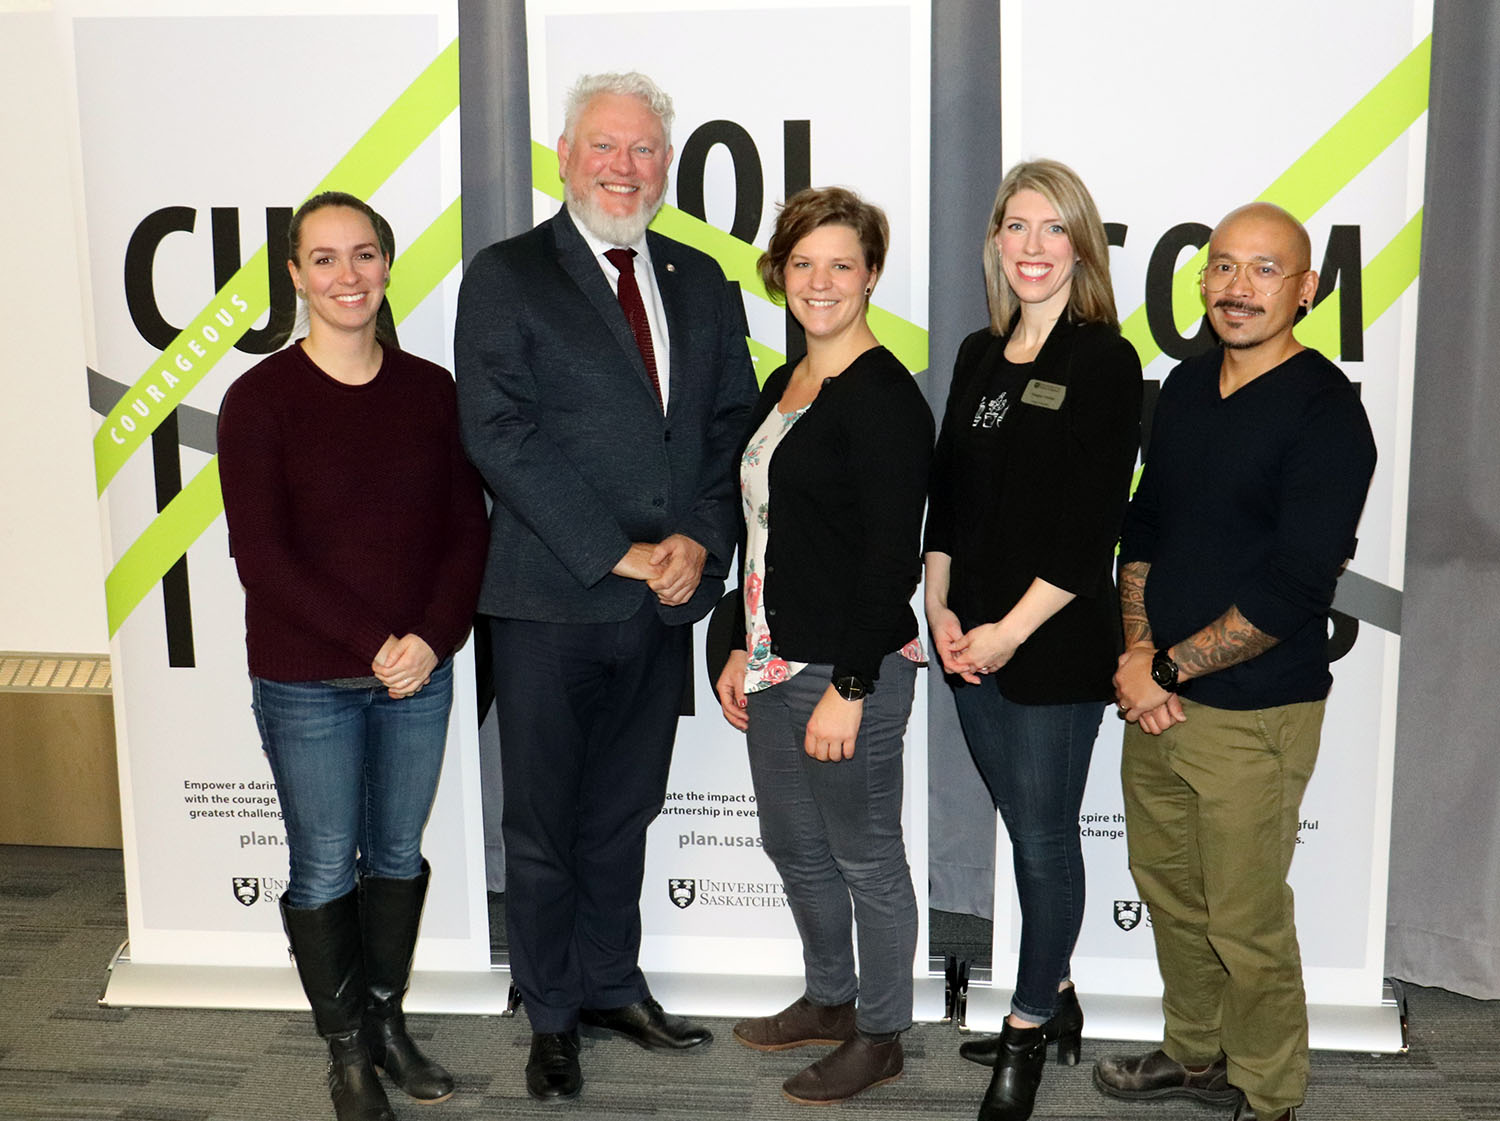 From left to right: Nicole Turner (EcoJustice Program), Dr. Steven M. Jones (USask Associate Provost Health), Hilary Gough (City of Saskatoon Ward 2 Councillor), Meagan Hinther (College of Education Manager of Communications and External Relations), and Mel Sysing (EcoJustice Program Lead).